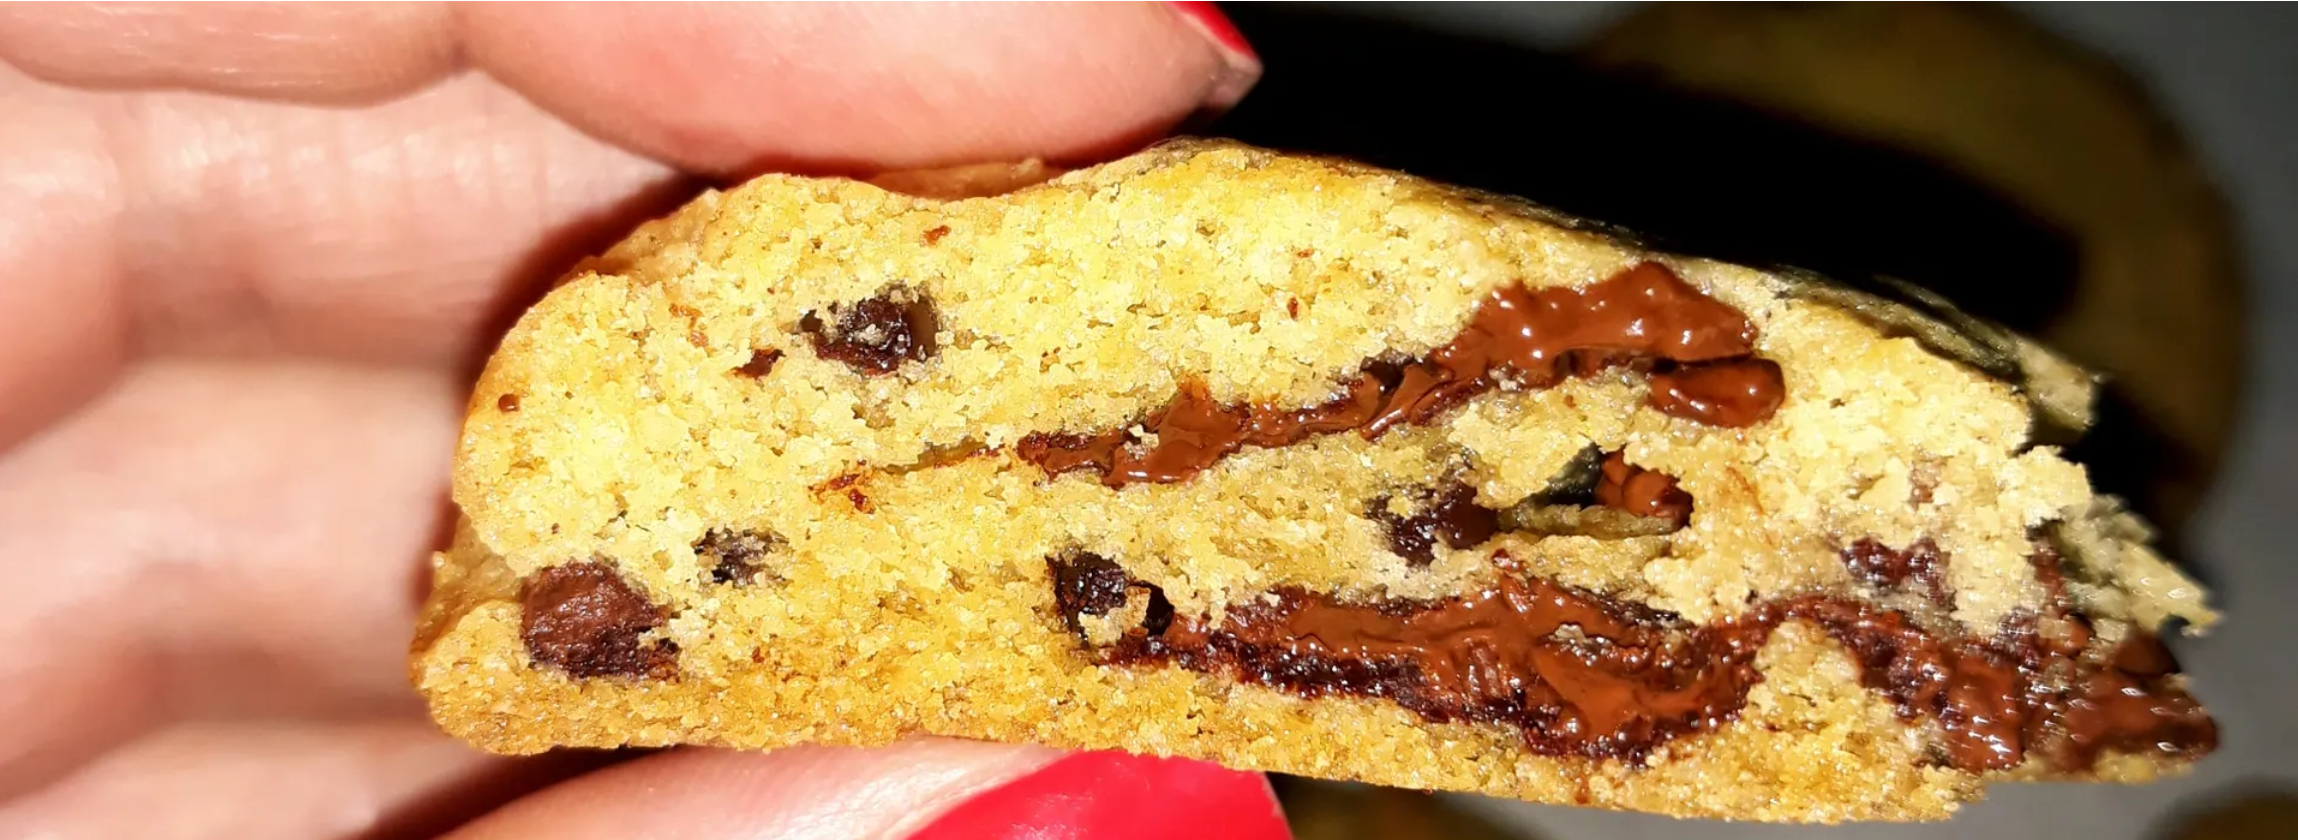 Delicious Chocolate Chip Cookie by Chef Jinny